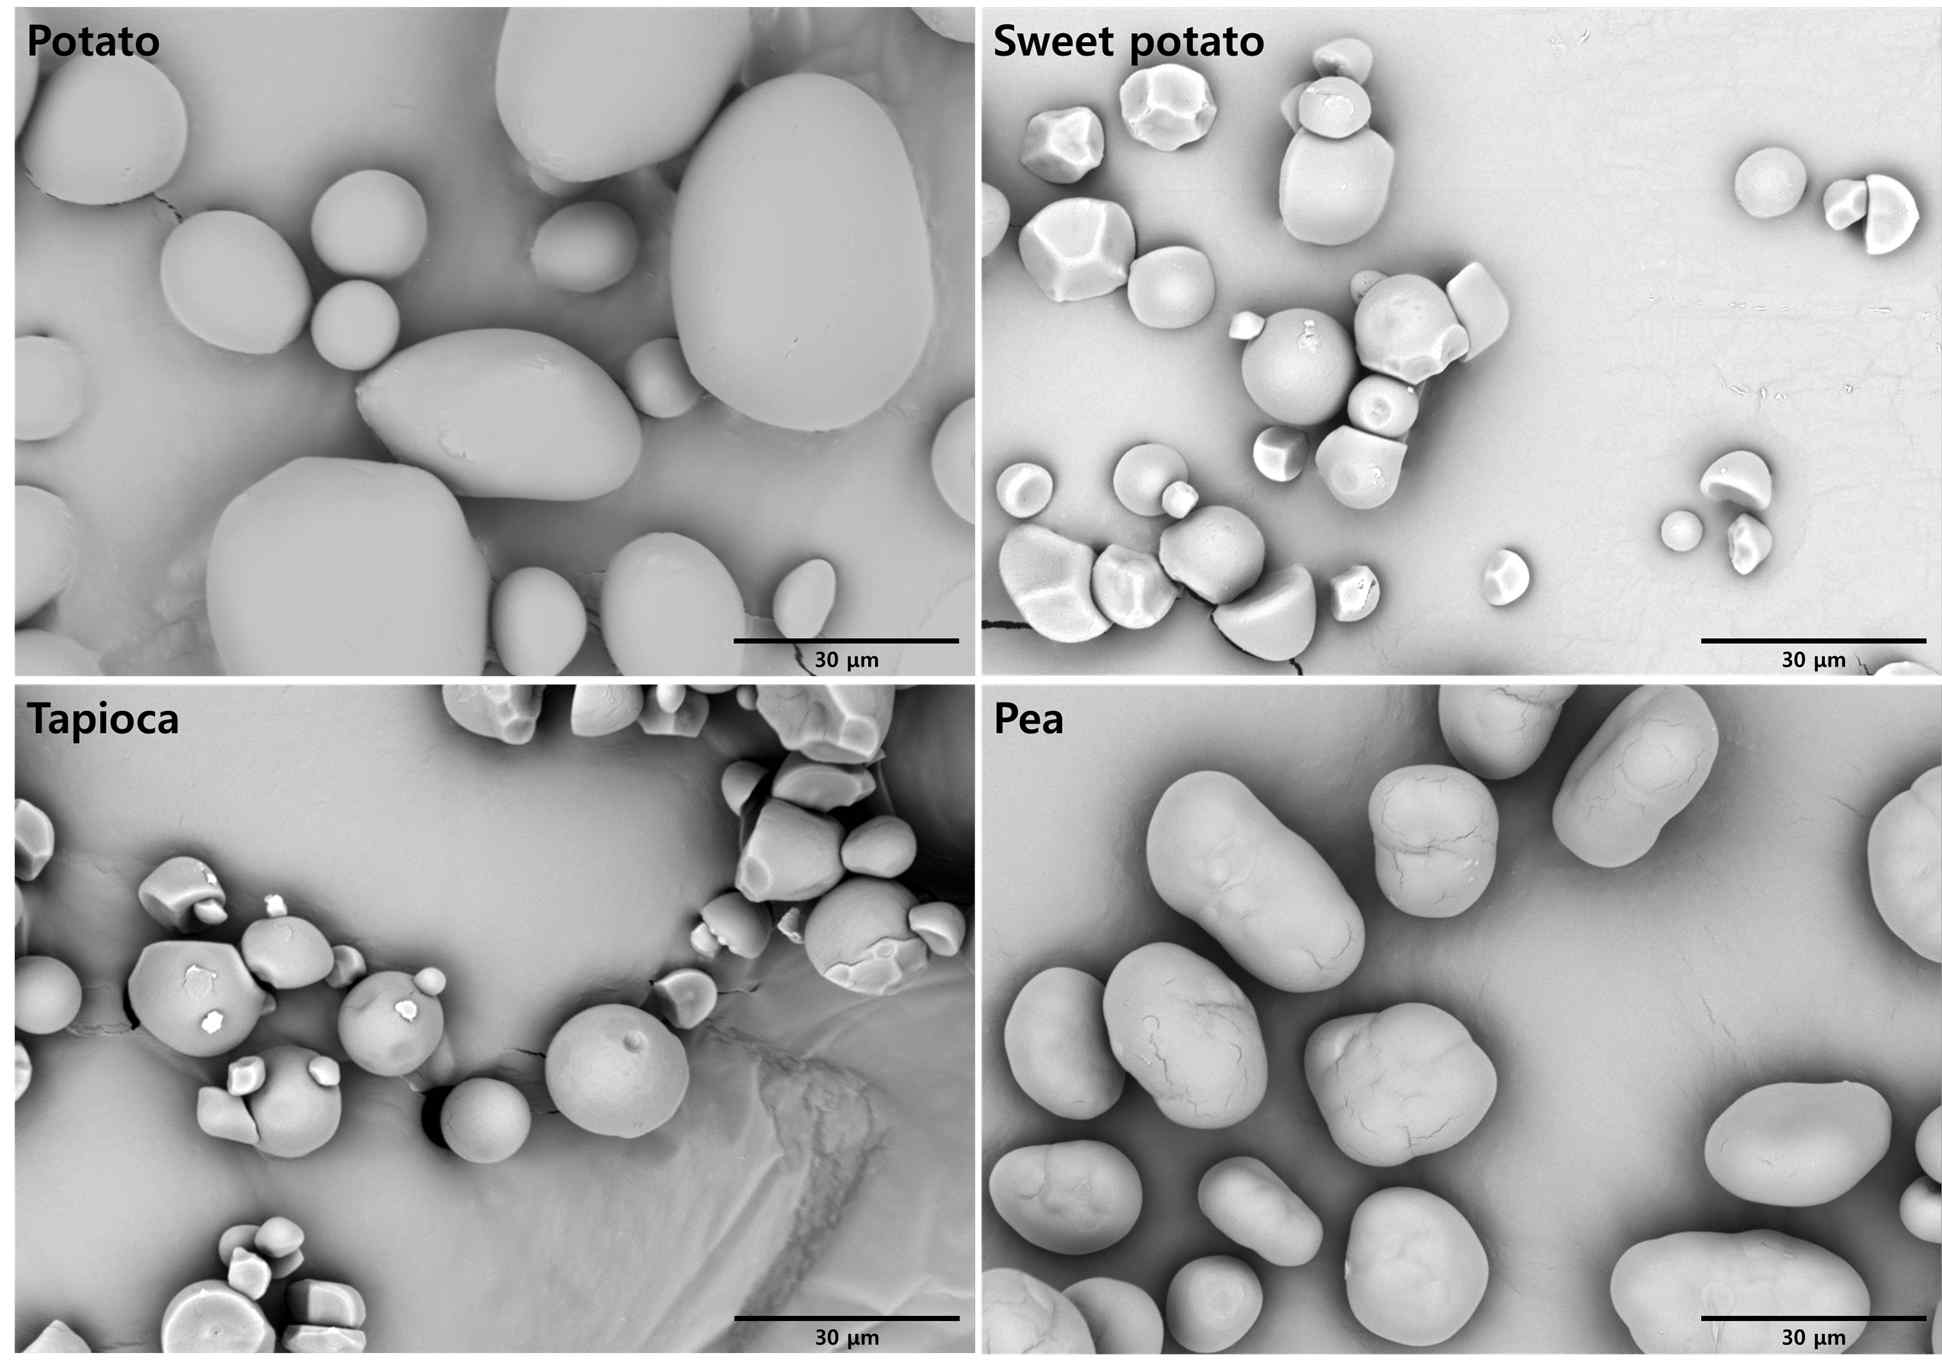 SEM images of native starches obtained from root/tuber